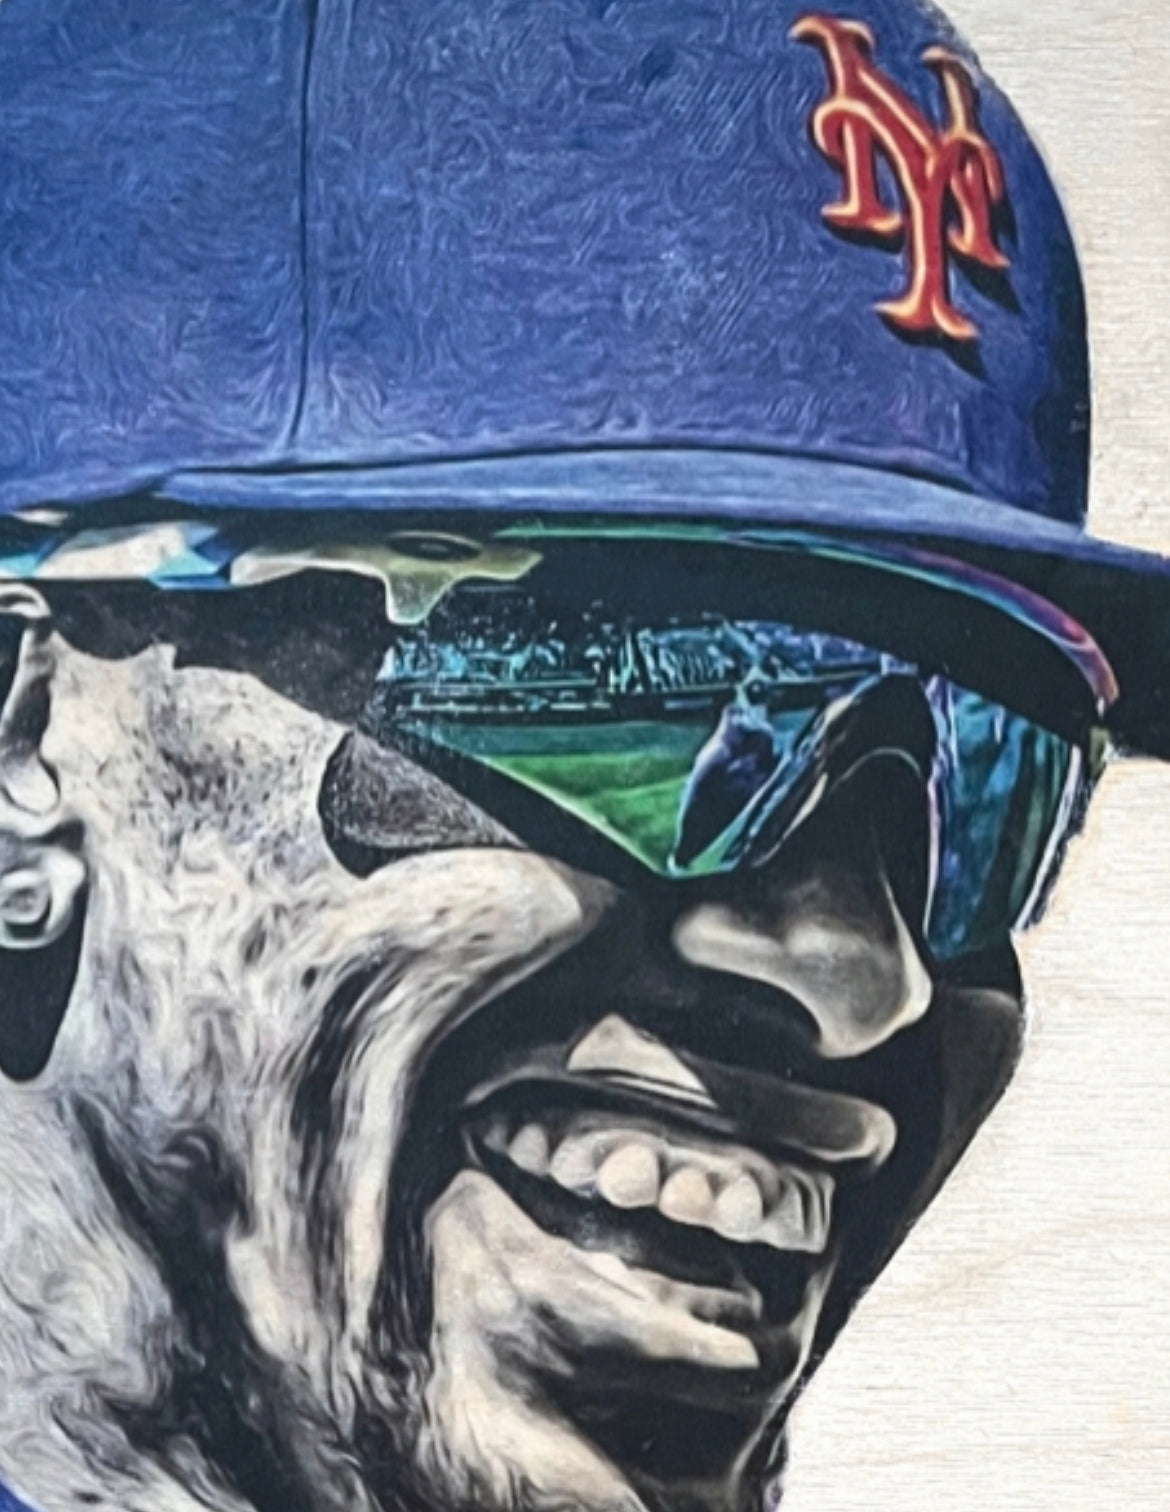 "New Threads" (Francisco Lindor) New York Mets - Officially Licensed MLB Print - Limited Release